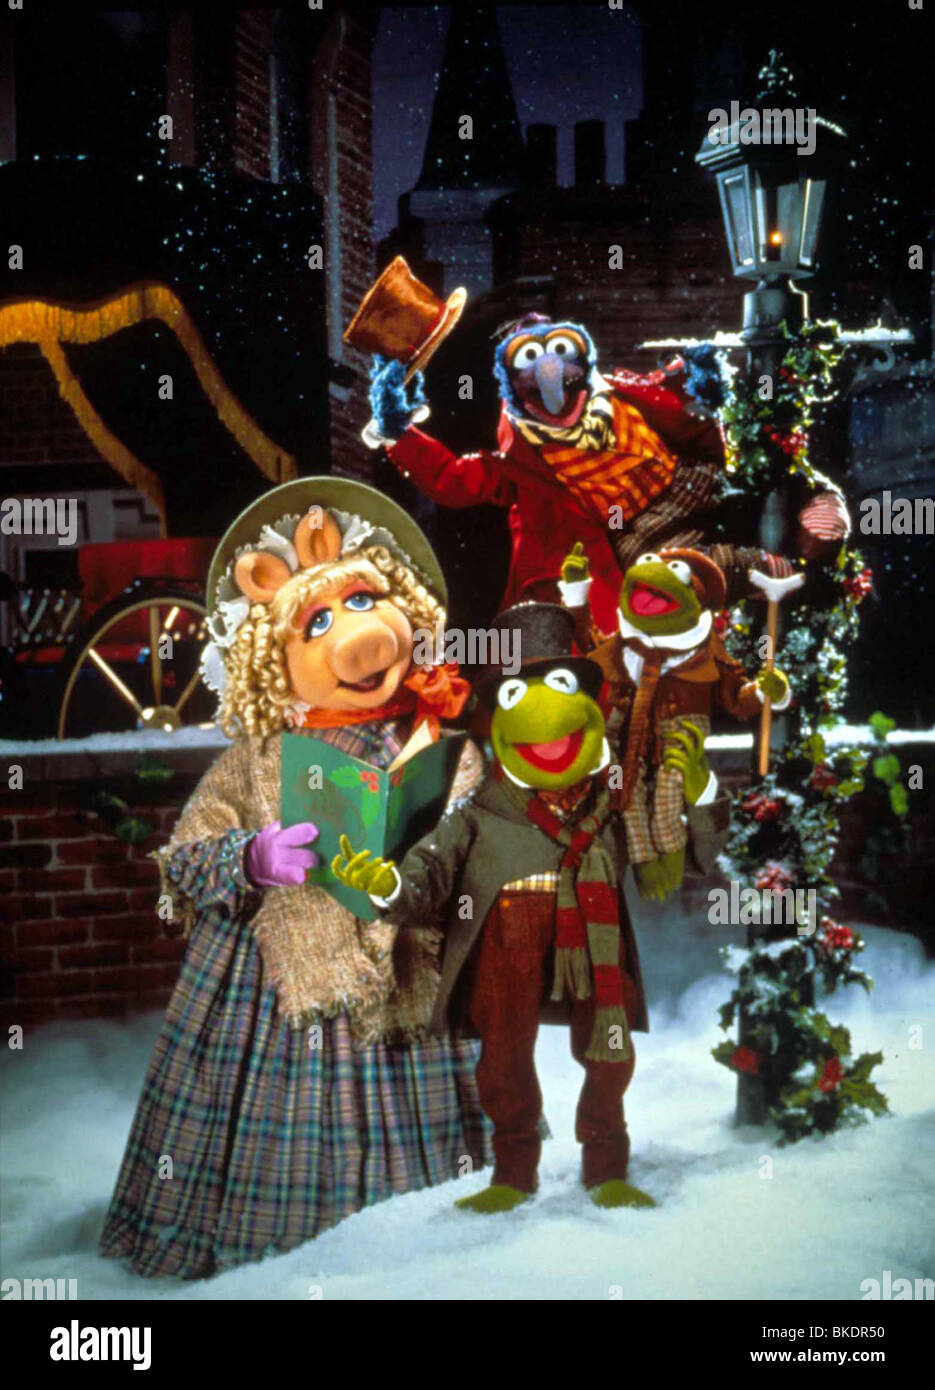 THE MUPPET CHRISTMAS CAROL (1992) MISS PIGGY, KERMIT THE FROG, GONZO, ROBIN THE FROG MCC 017 Stock Photo